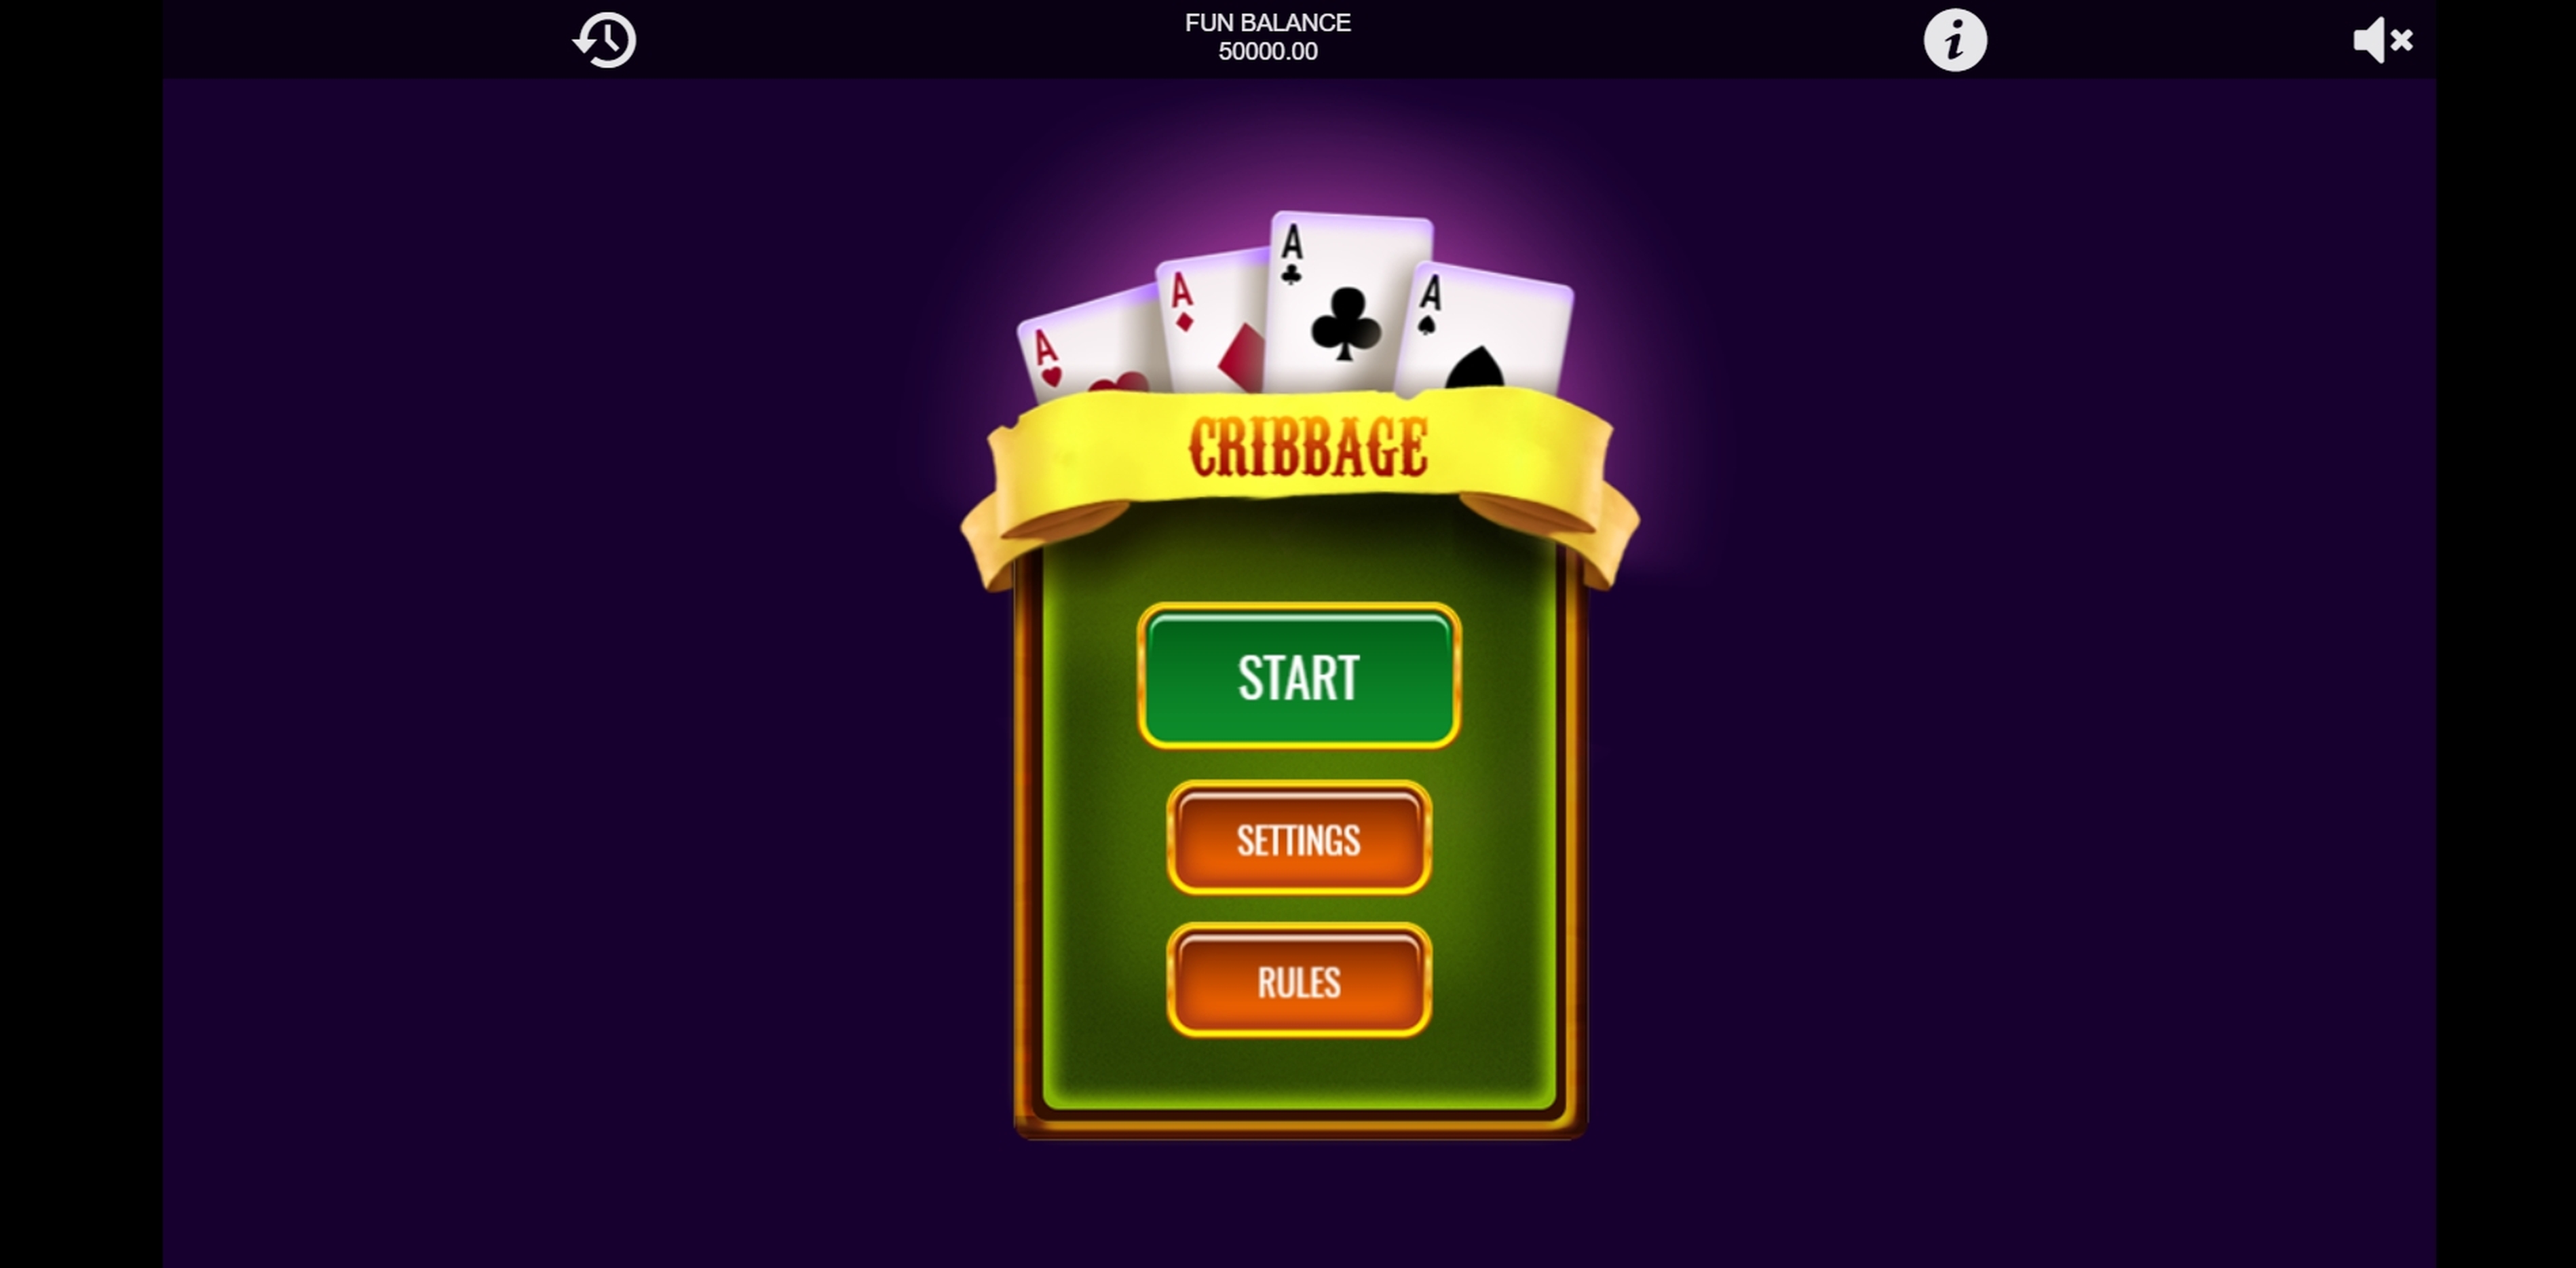 Play Cribbage Free Casino Slot Game by 1x2 Gaming